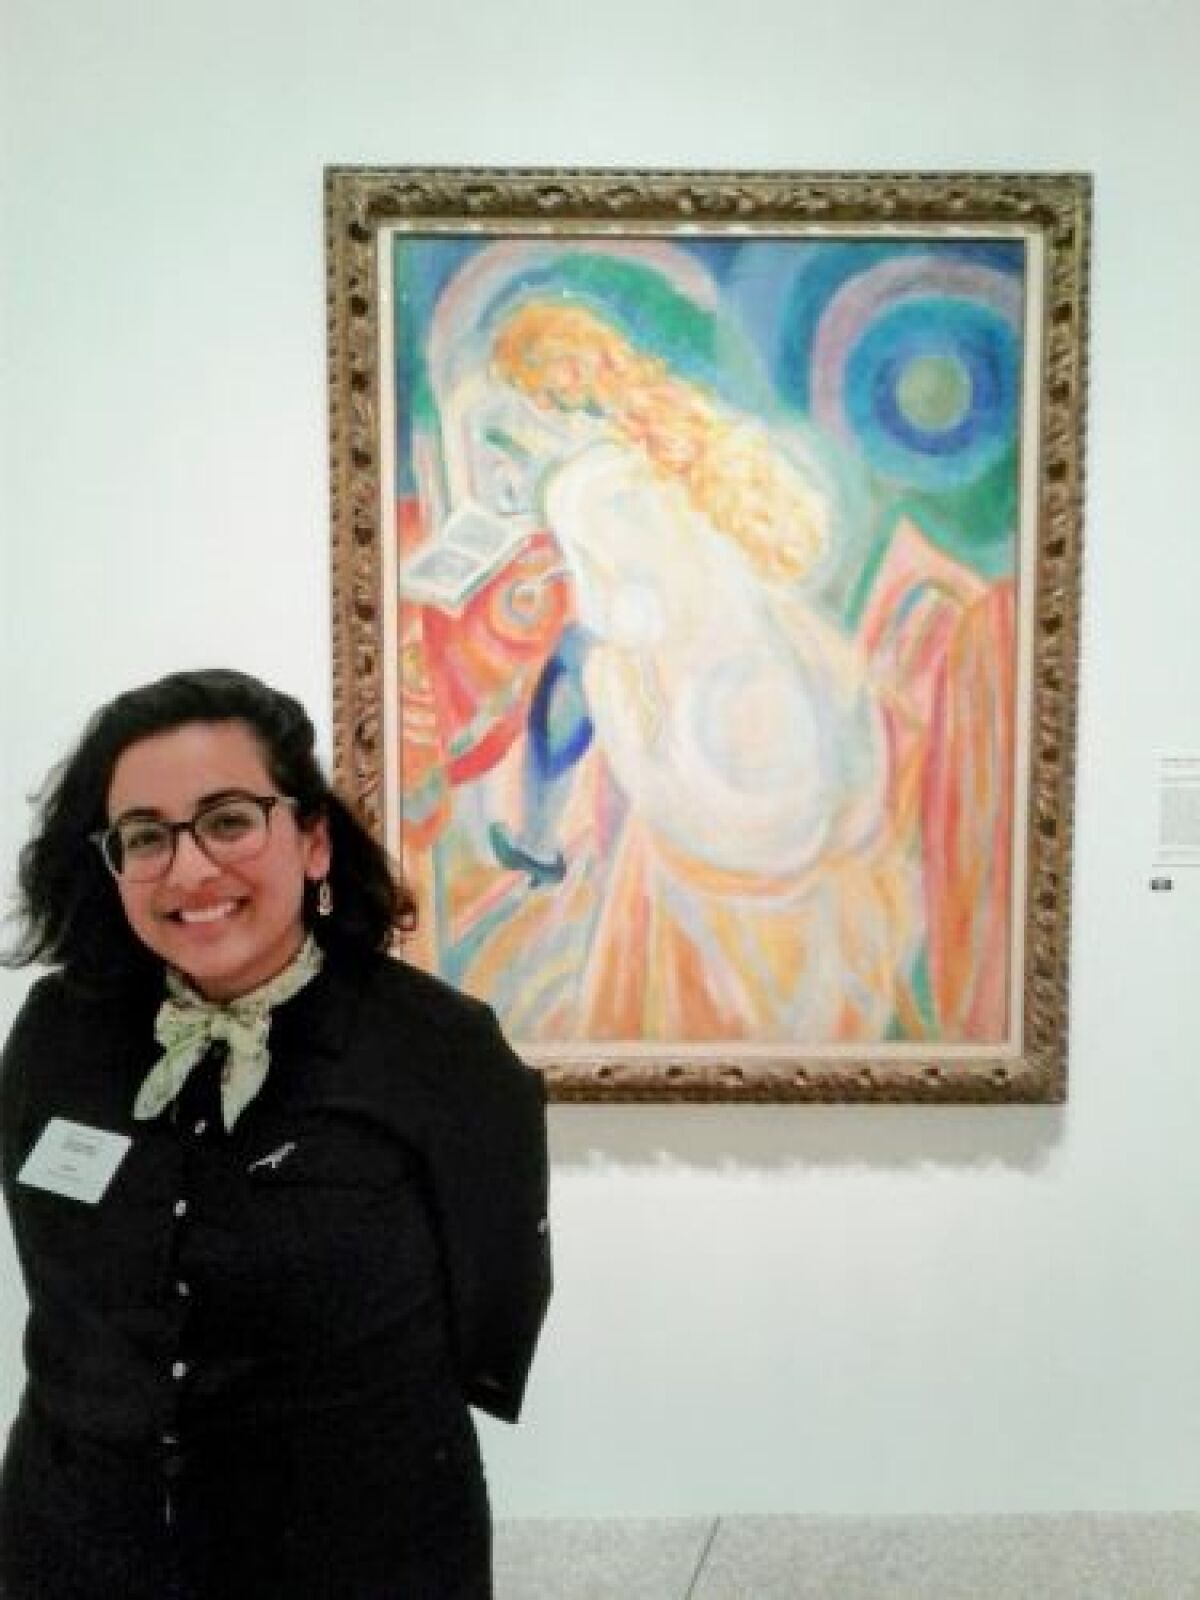 A woman in a uniform and name tag stands, smiling, in front of a painting in a museum